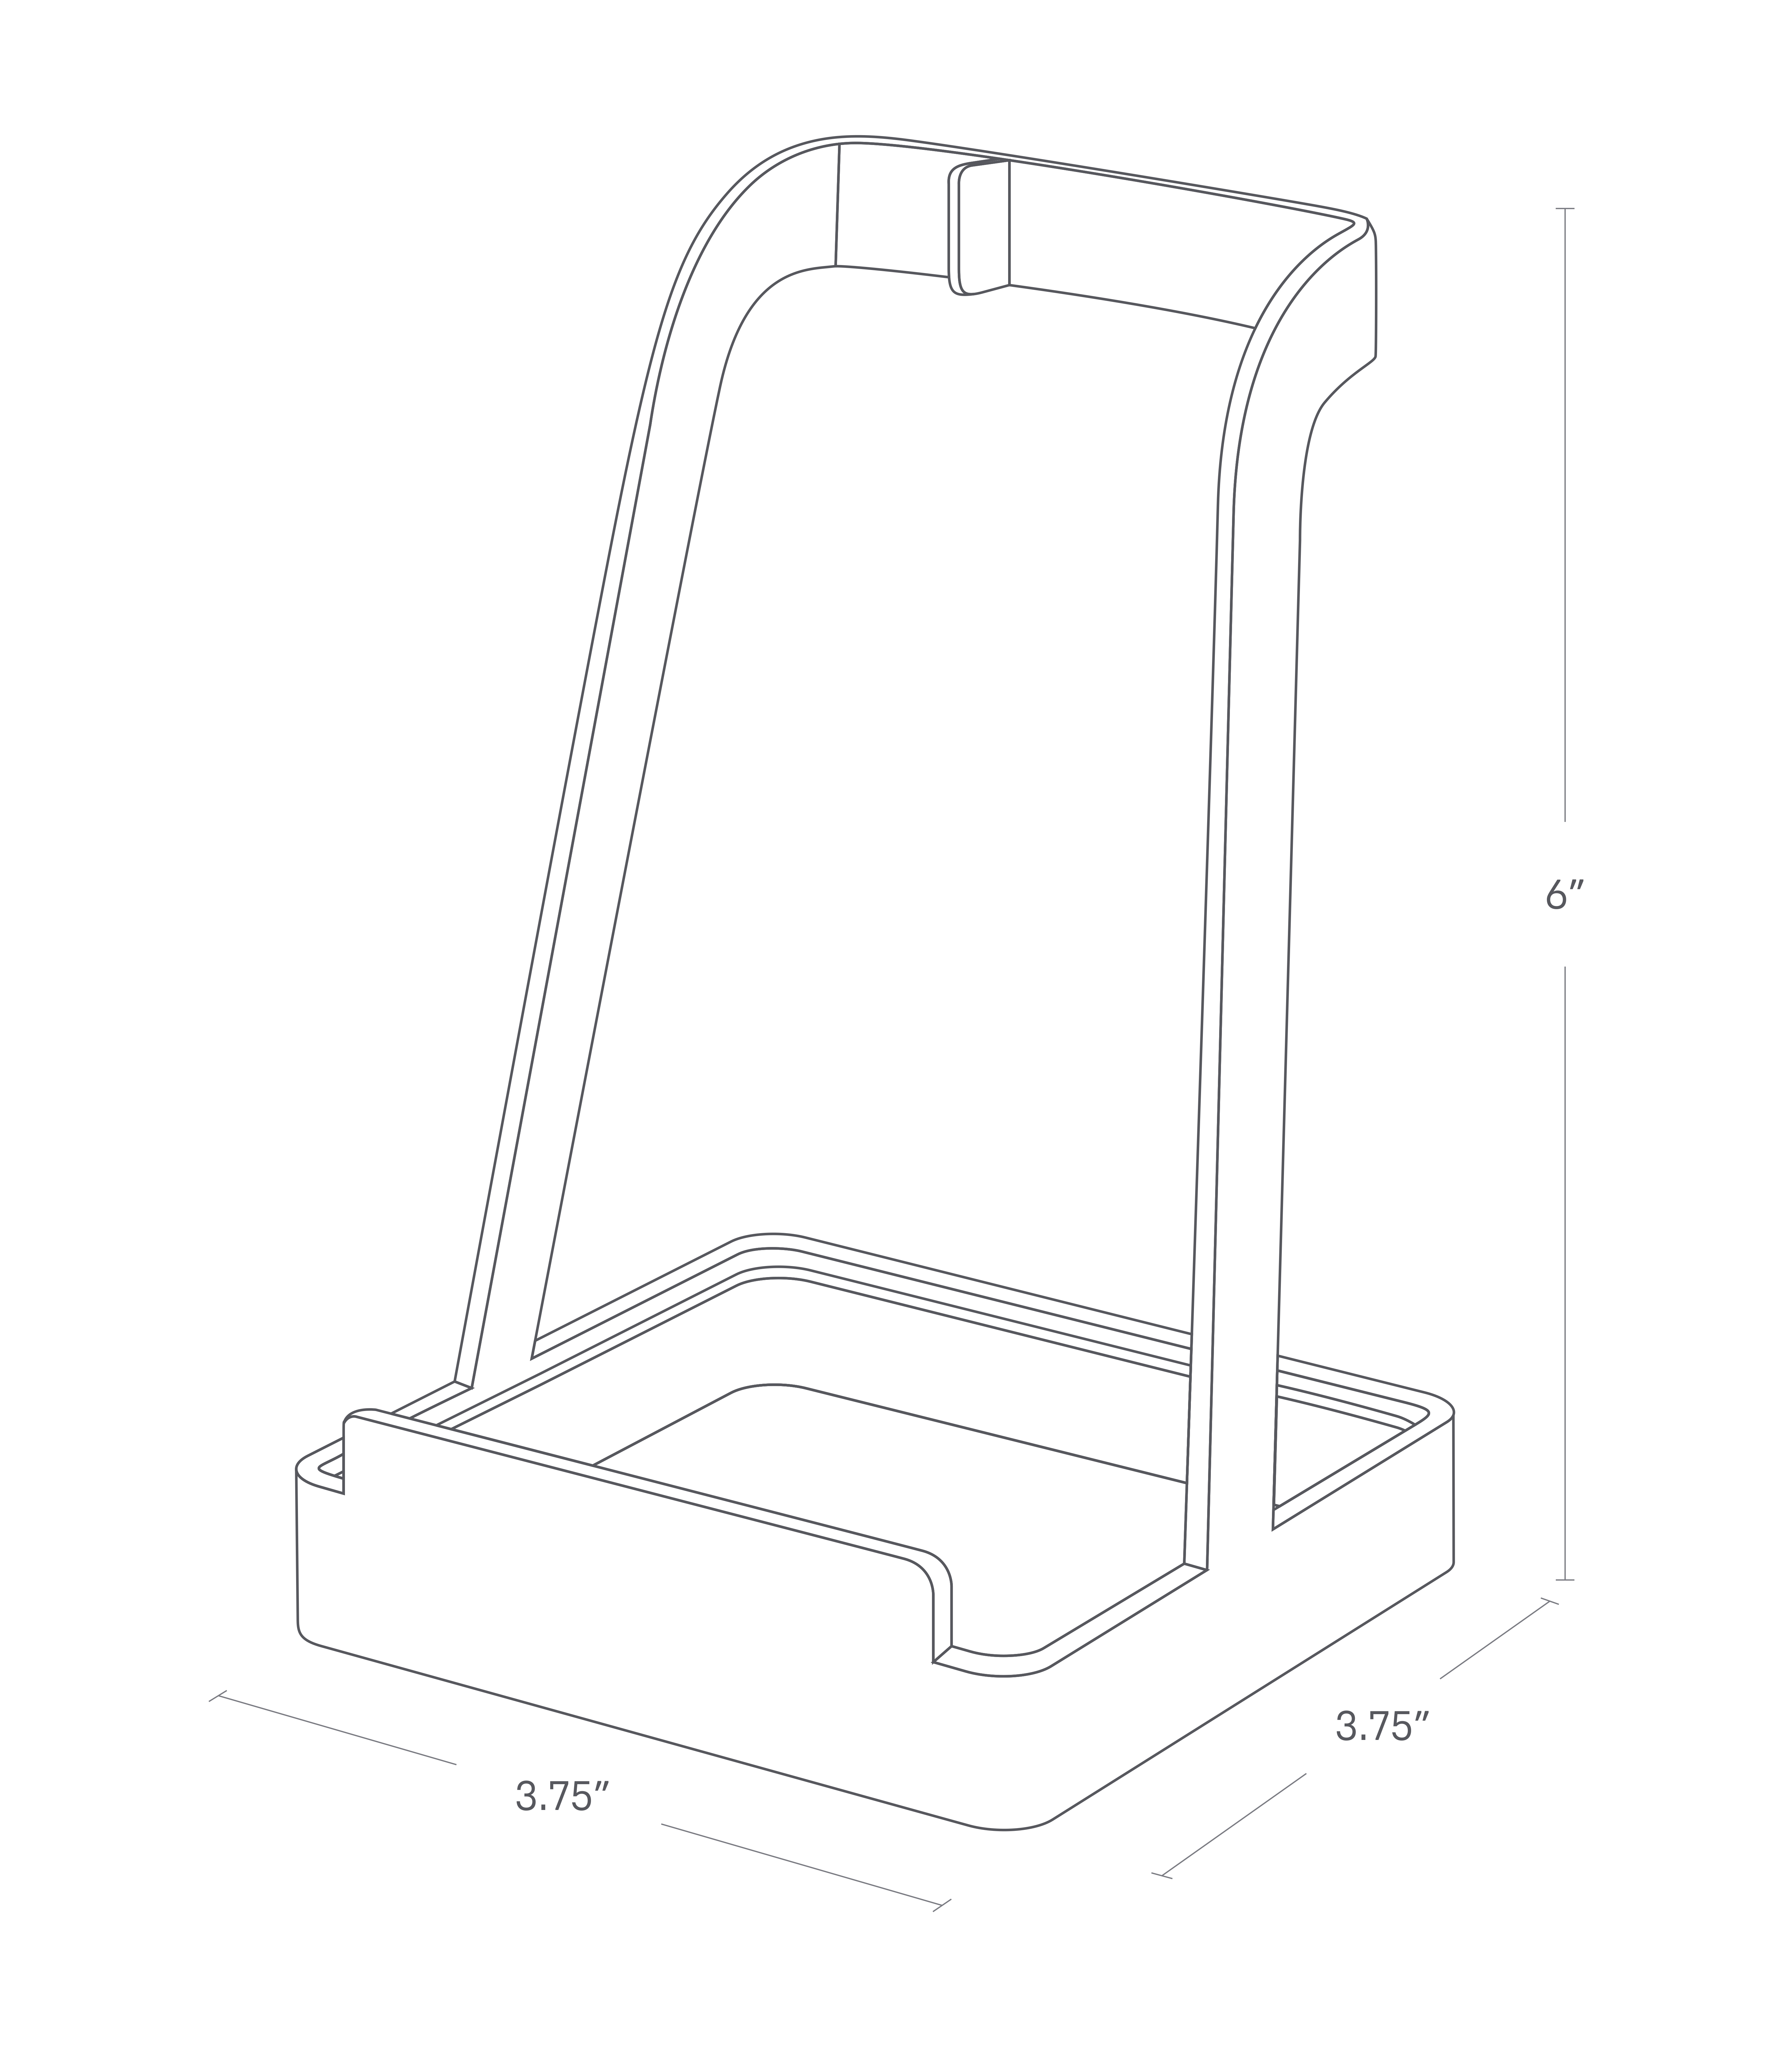 Dimenision image for Lid & Ladle Standon a white background showing total width of 3.75